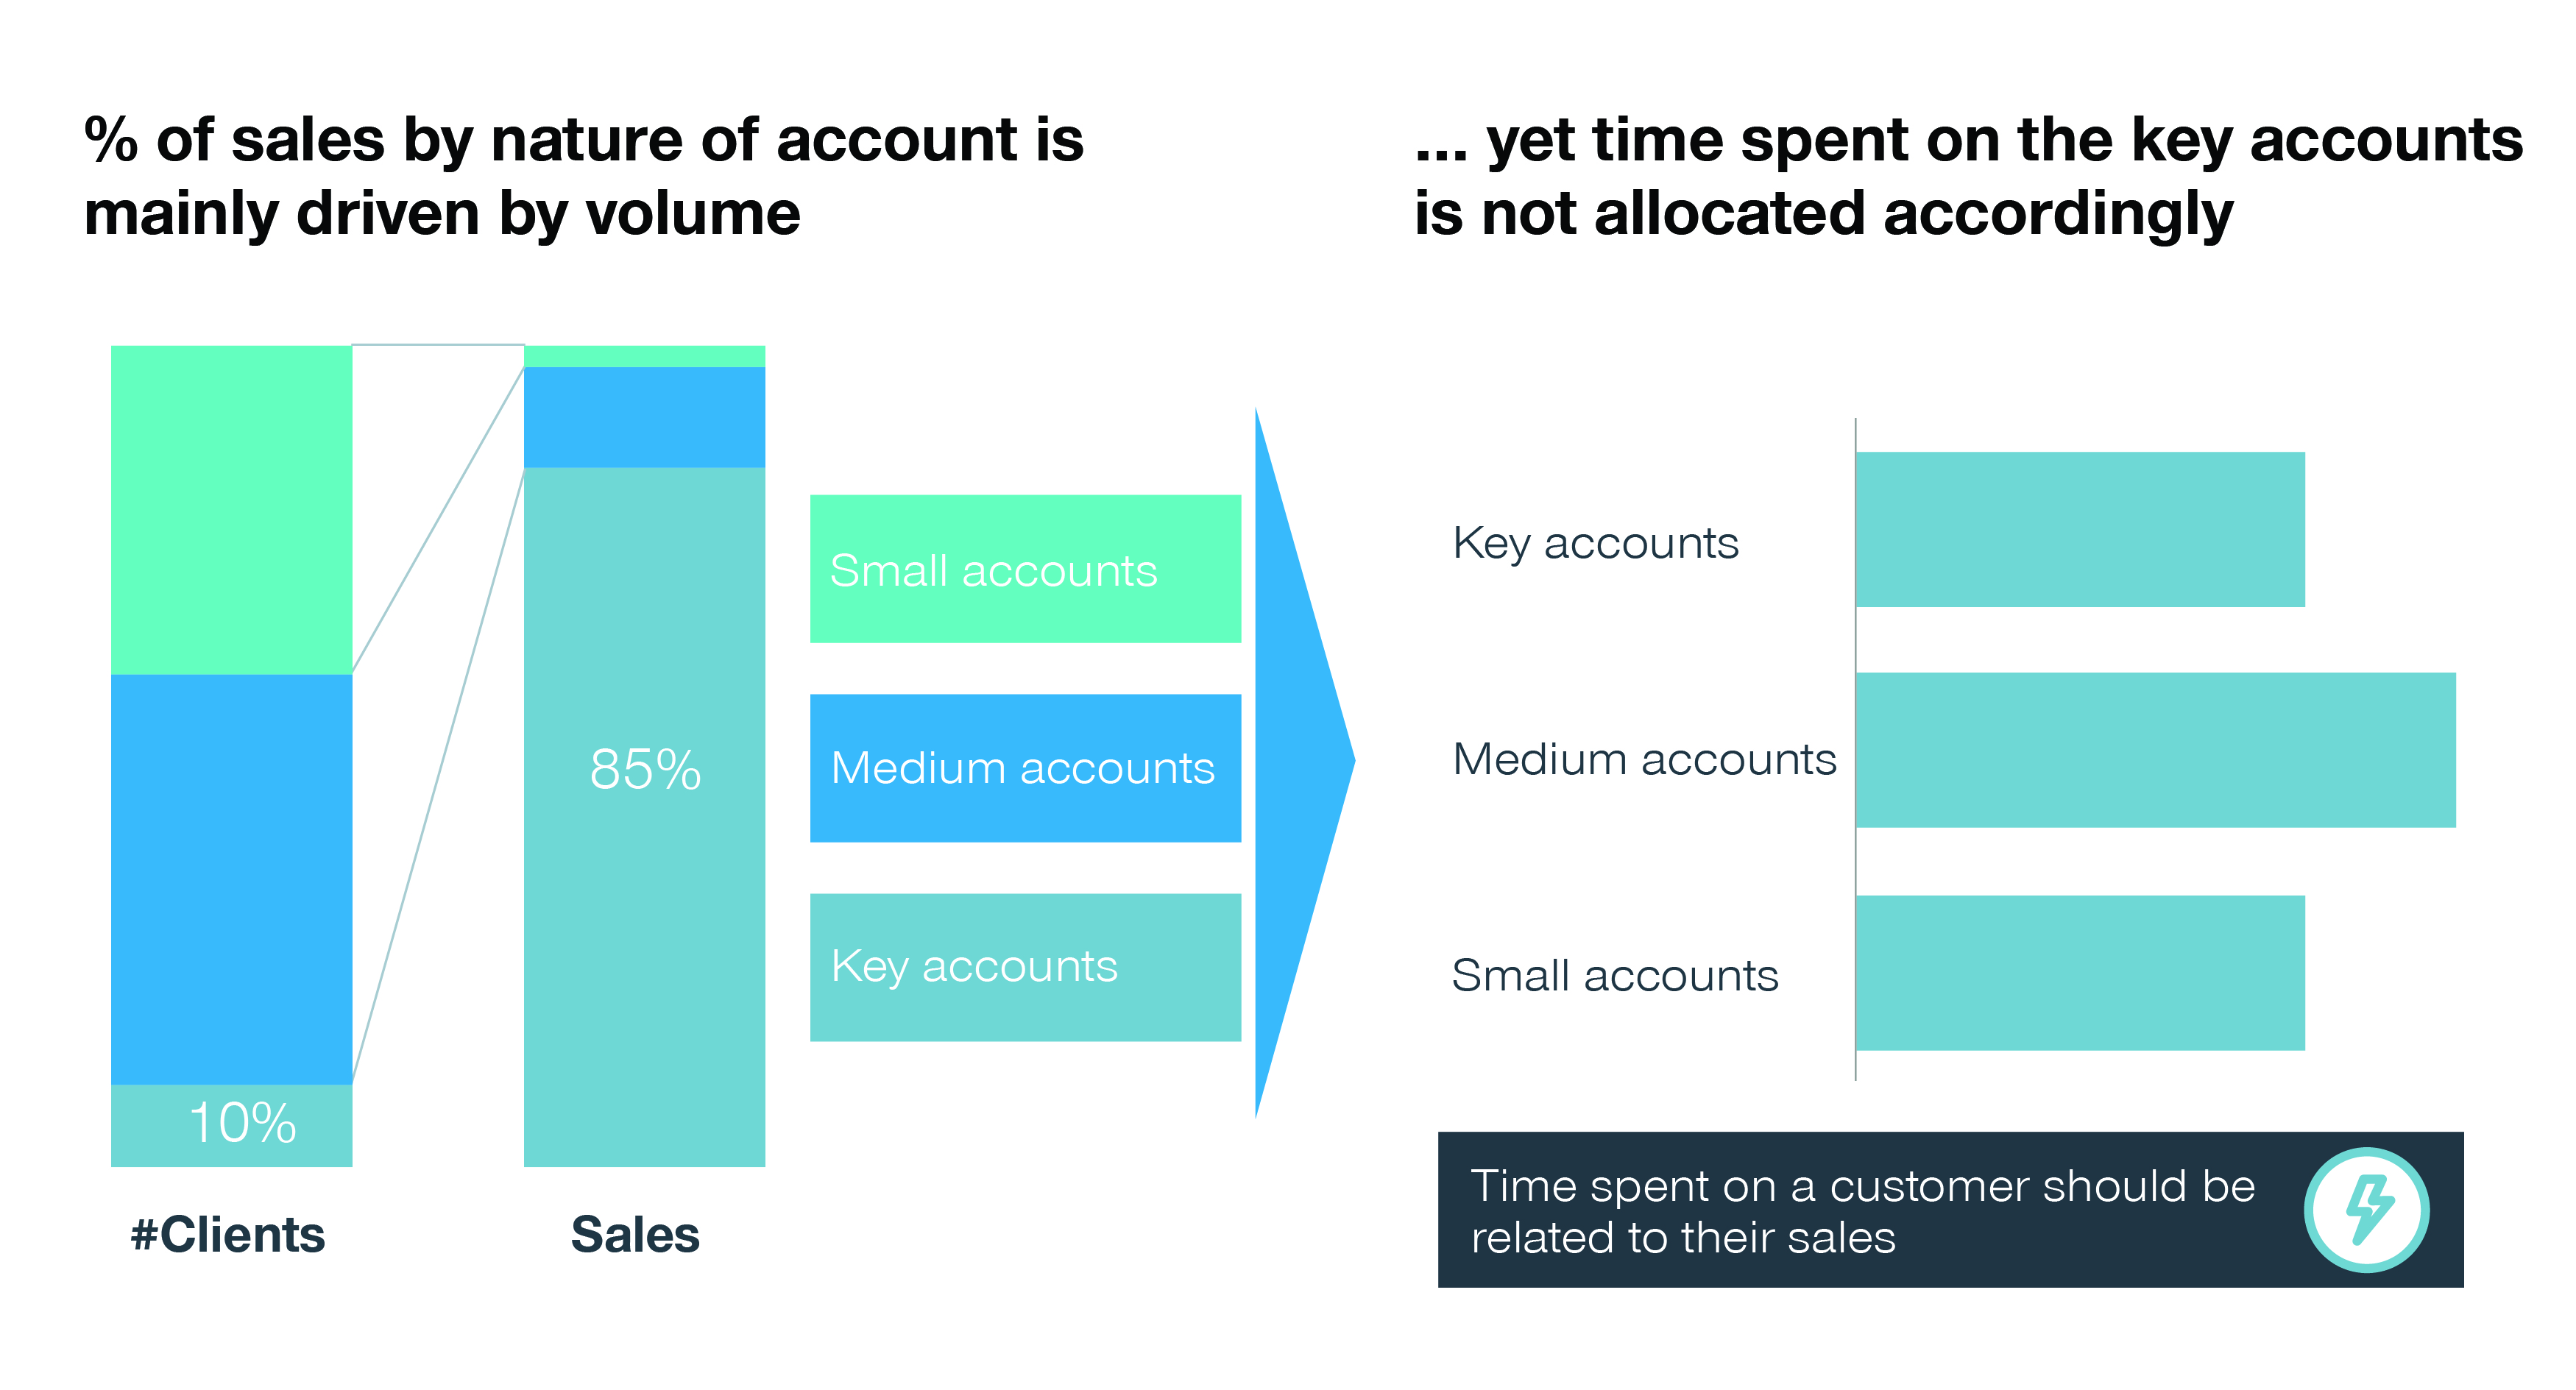 Time spent on accounts